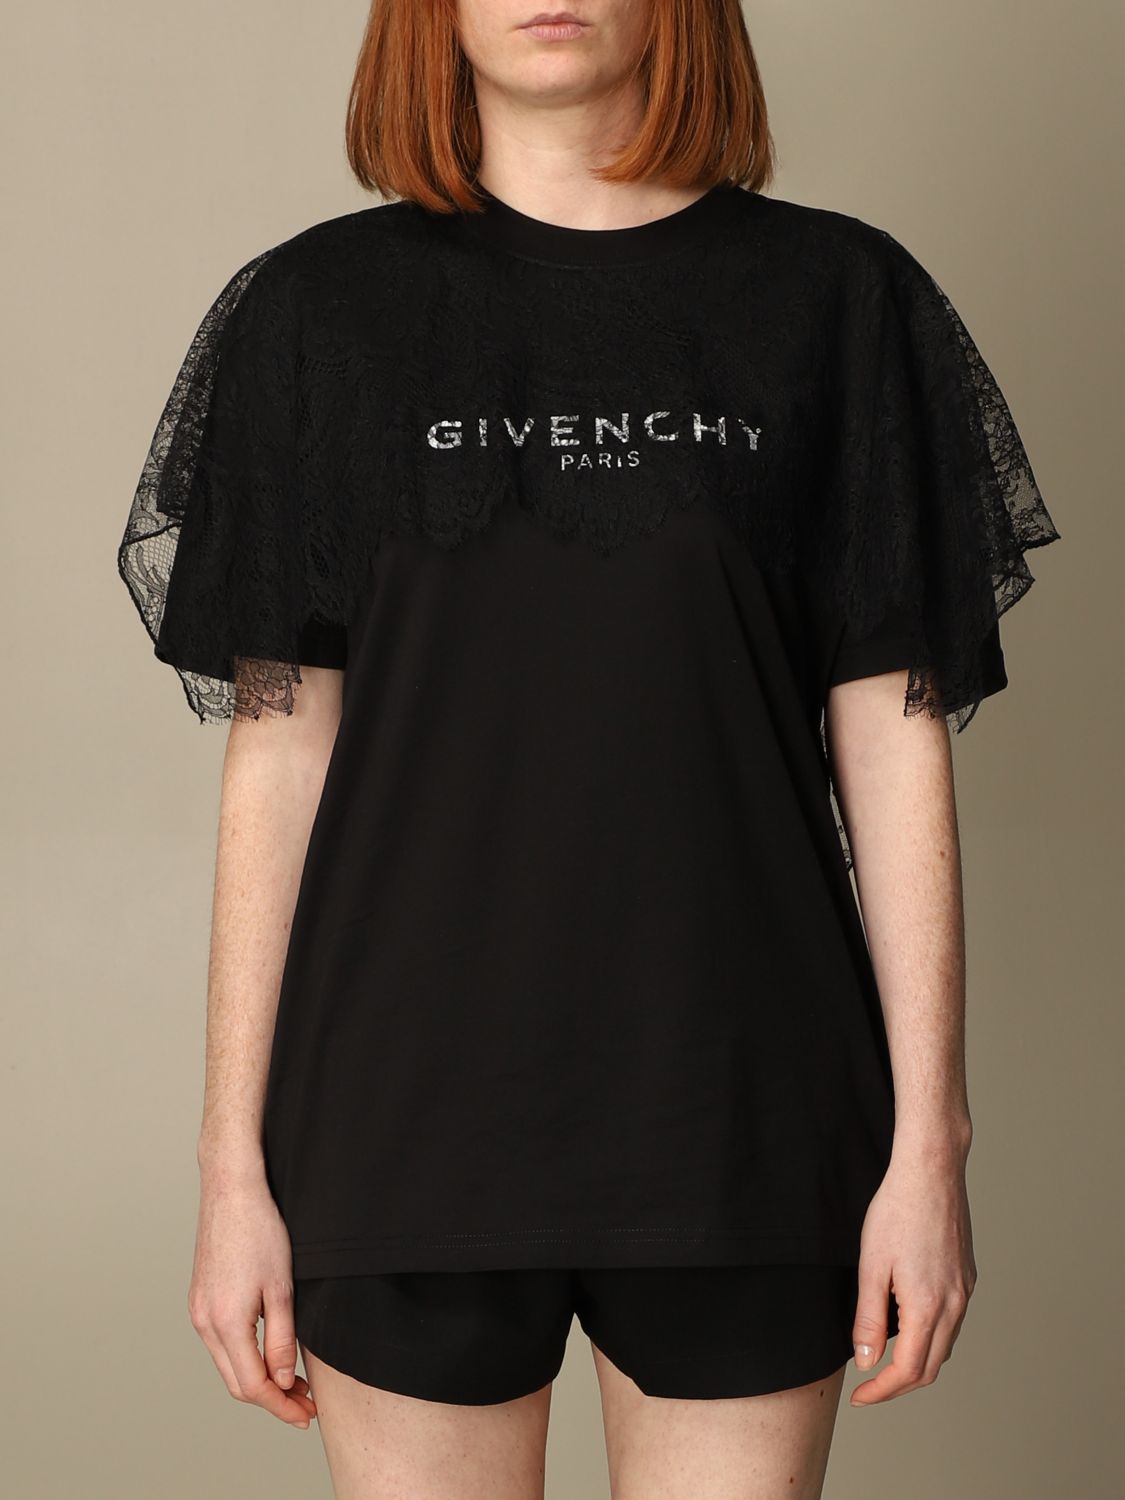 womens givenchy sweater